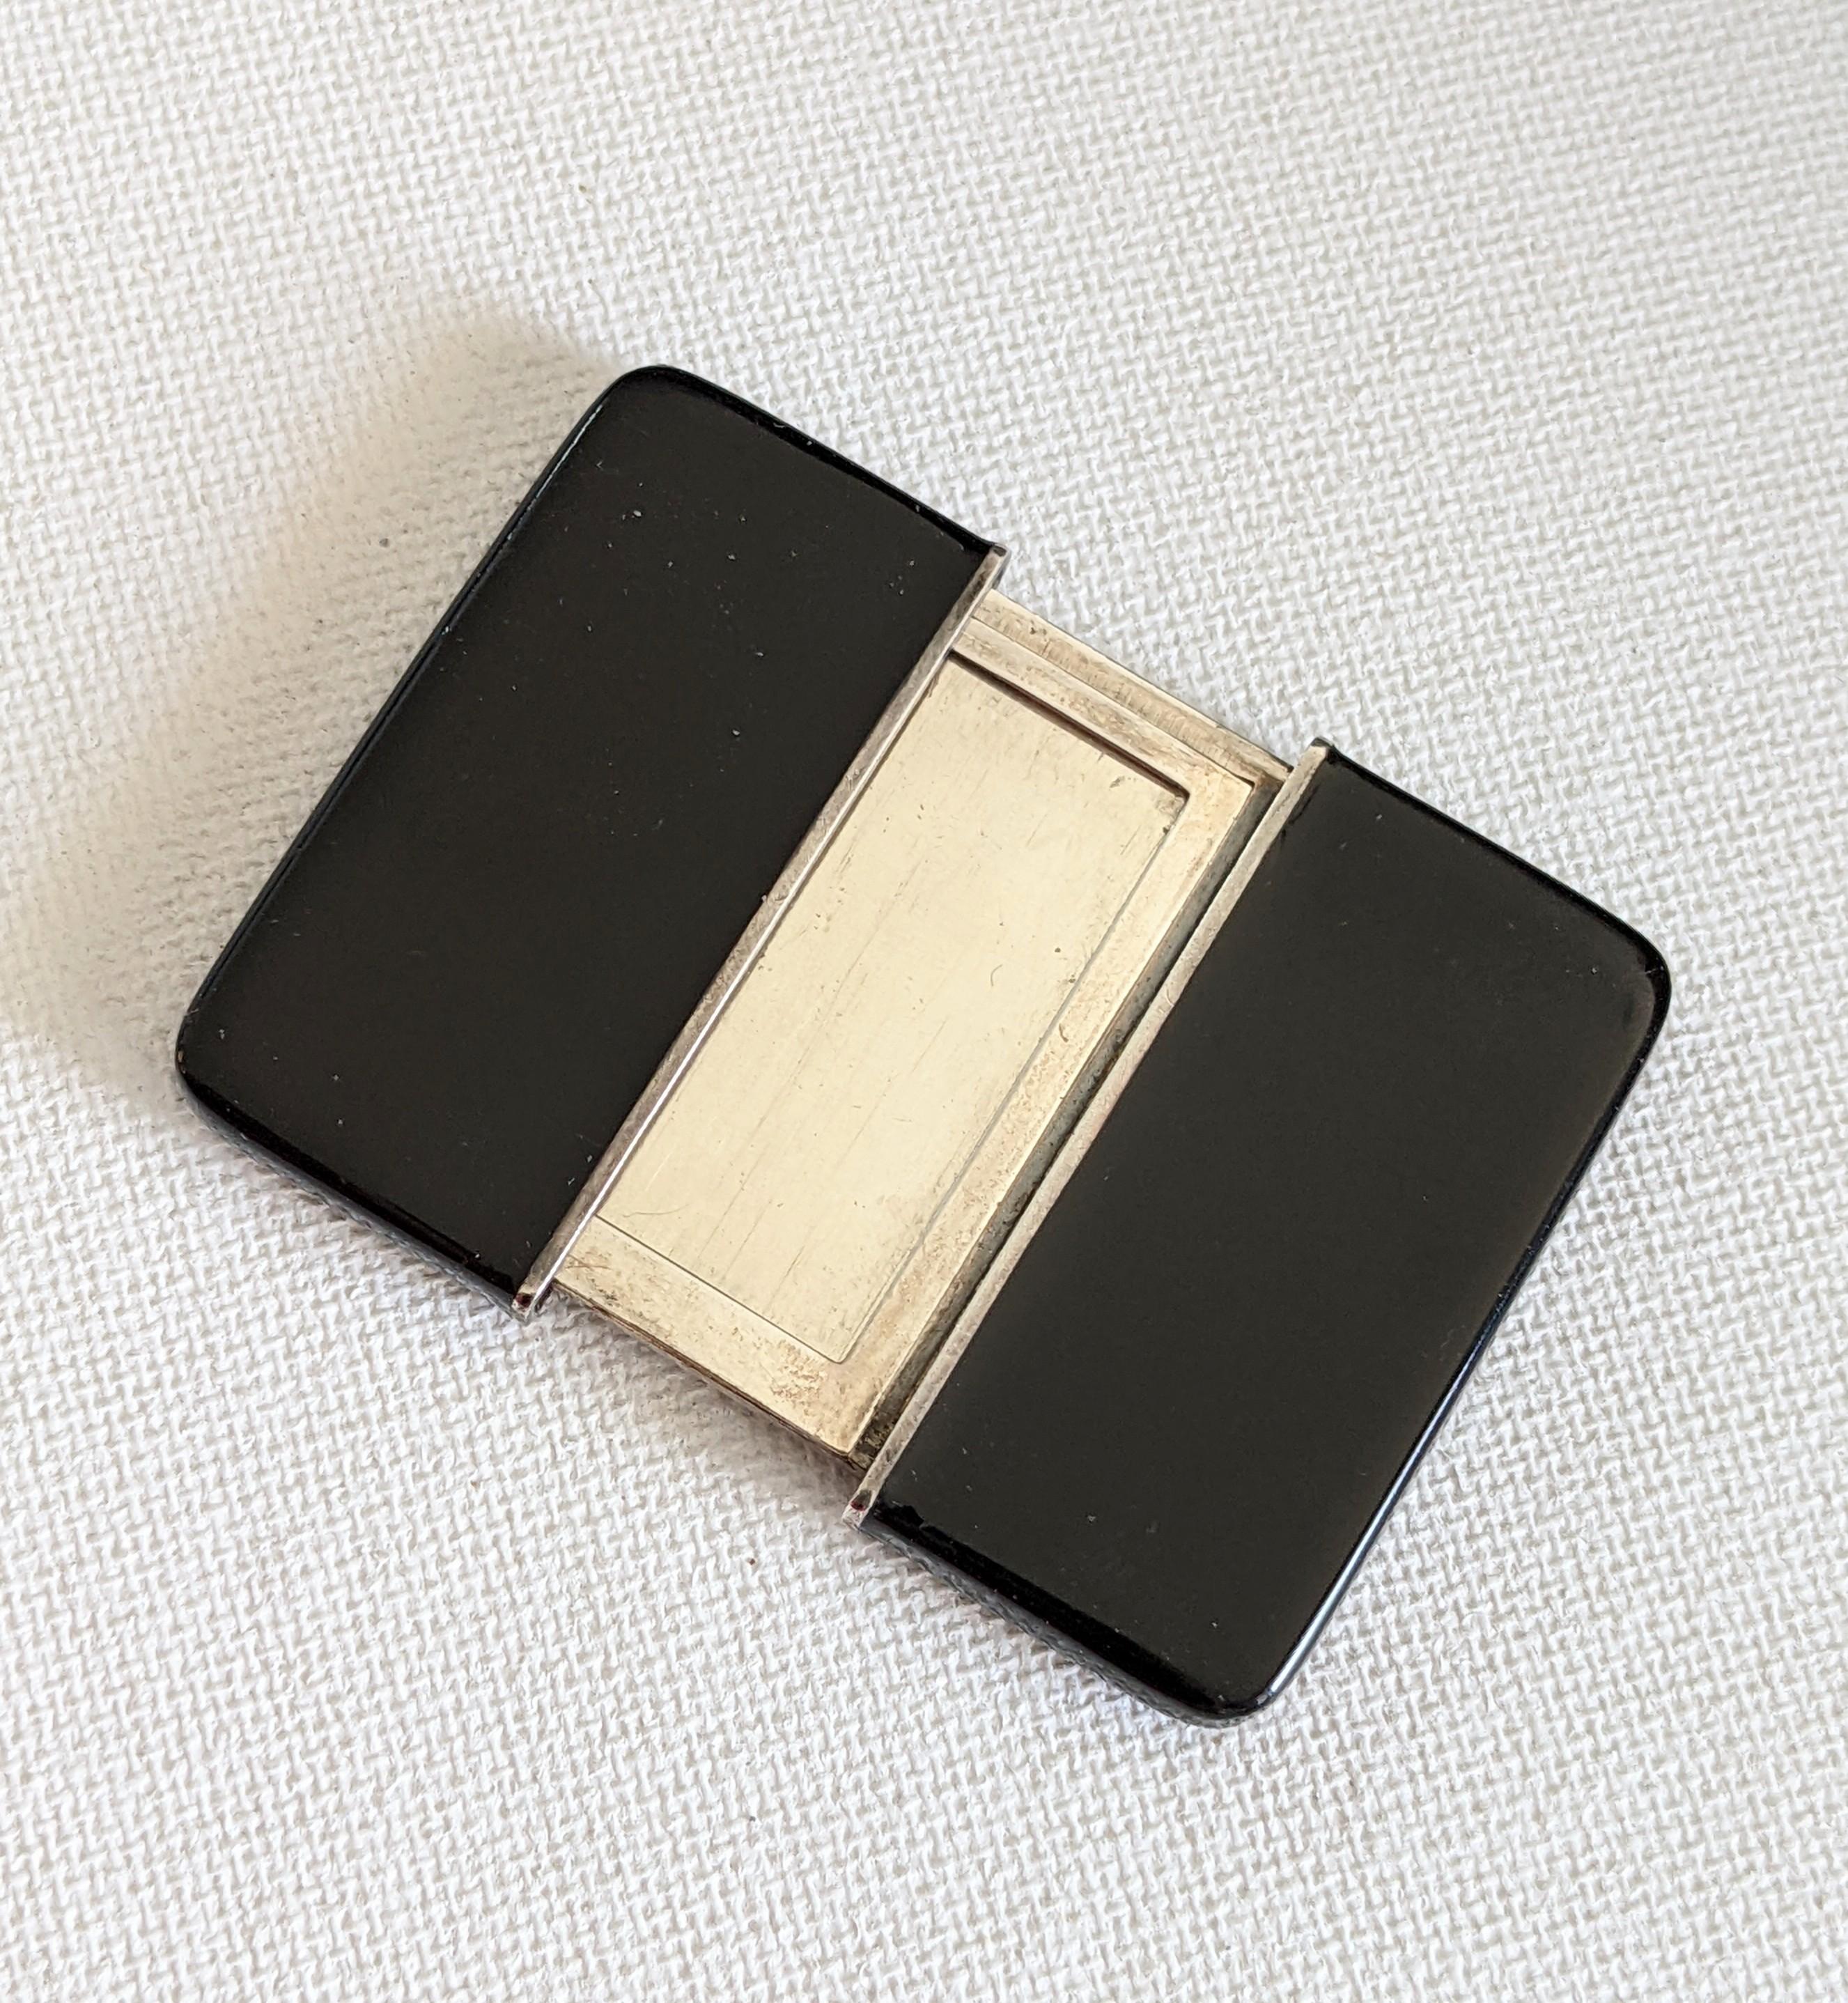 Elegant French Black Lacquer Travel Photo Frame to keep close ones at hand. Cover slides over on each side to reveal photo which can be propped up on a table as well. Marked LaFoto, Made in France. 1930's Silverplate. 